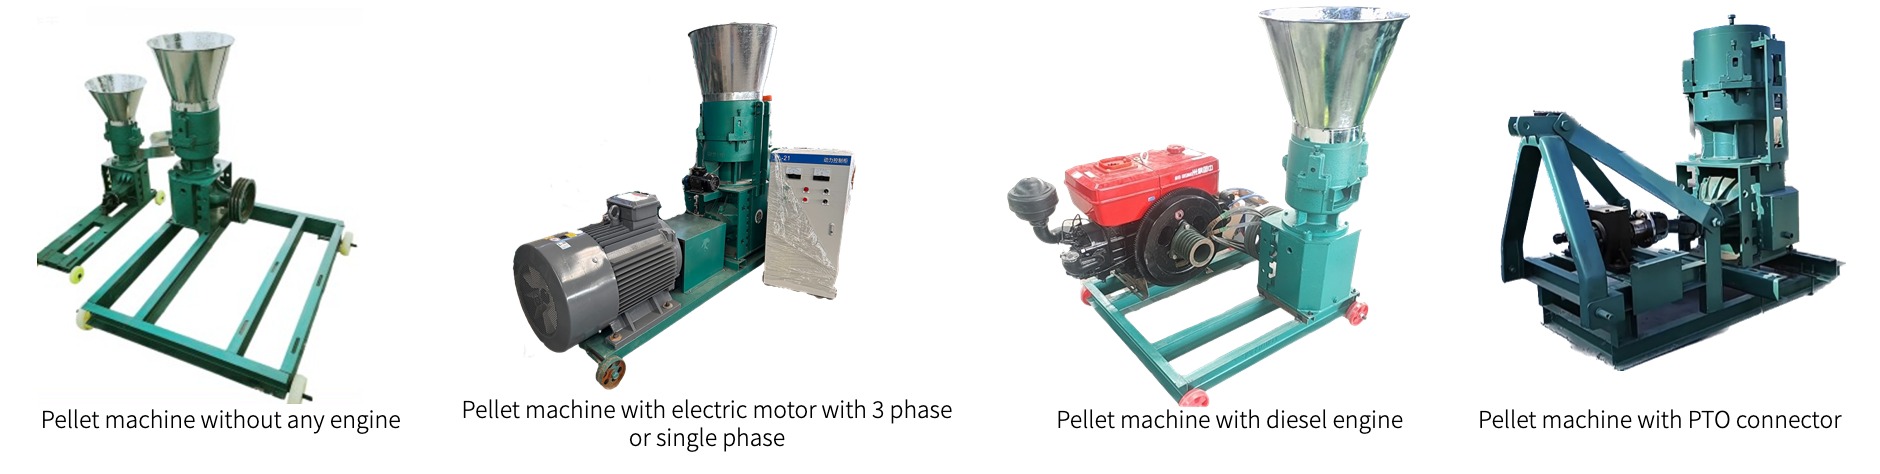 All types of feed pellet machines.jpeg